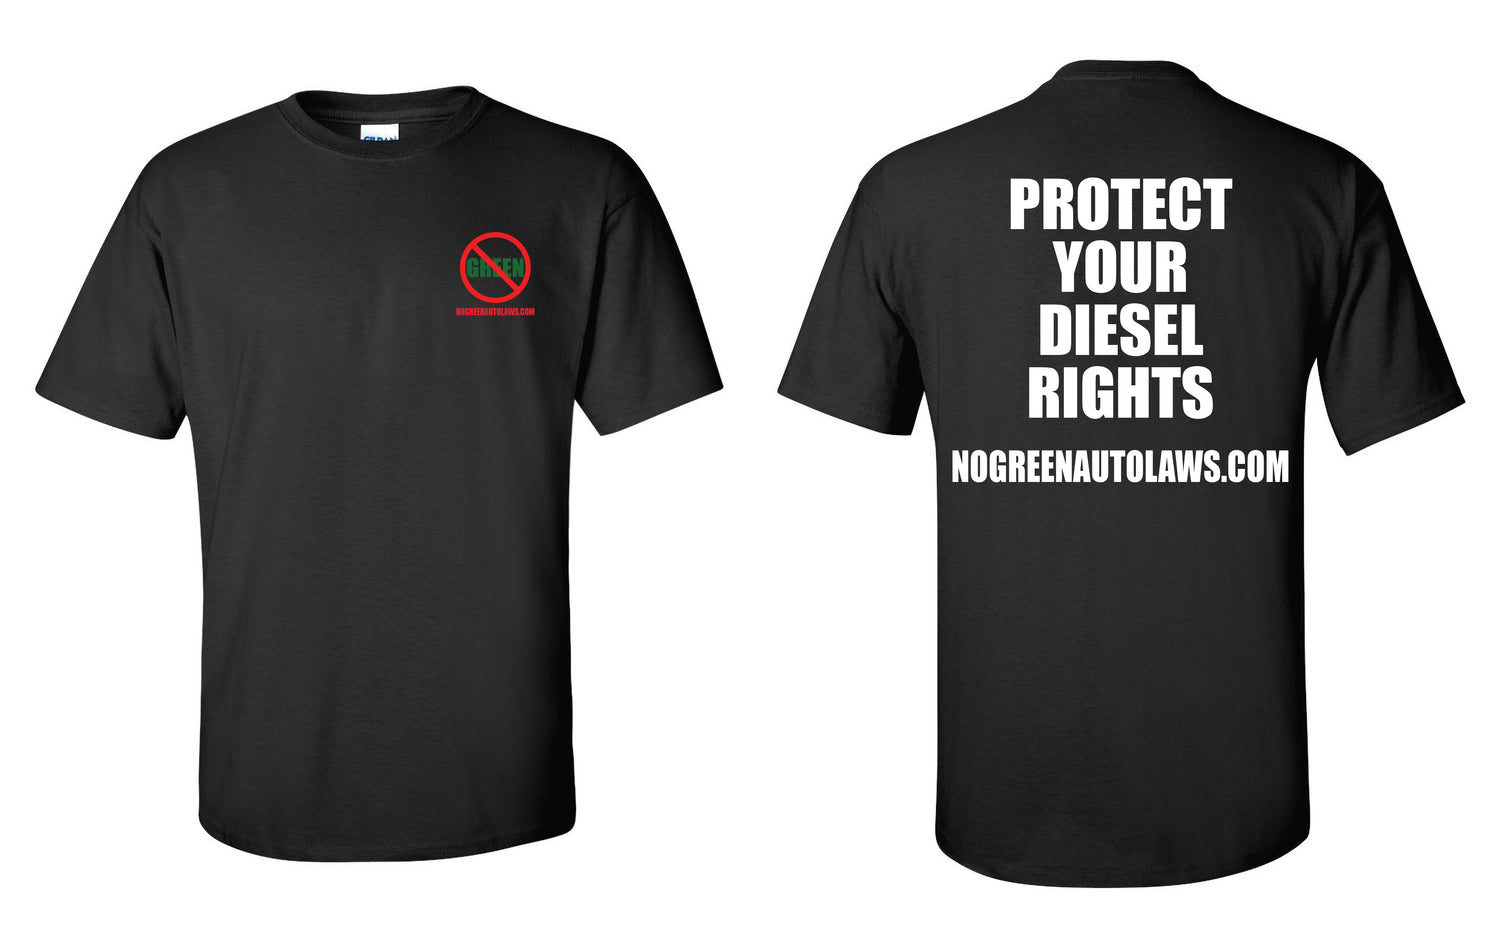 GET ALL PROTECT YOUR DIESEL RIGHTS MERCHANDISE HERE!